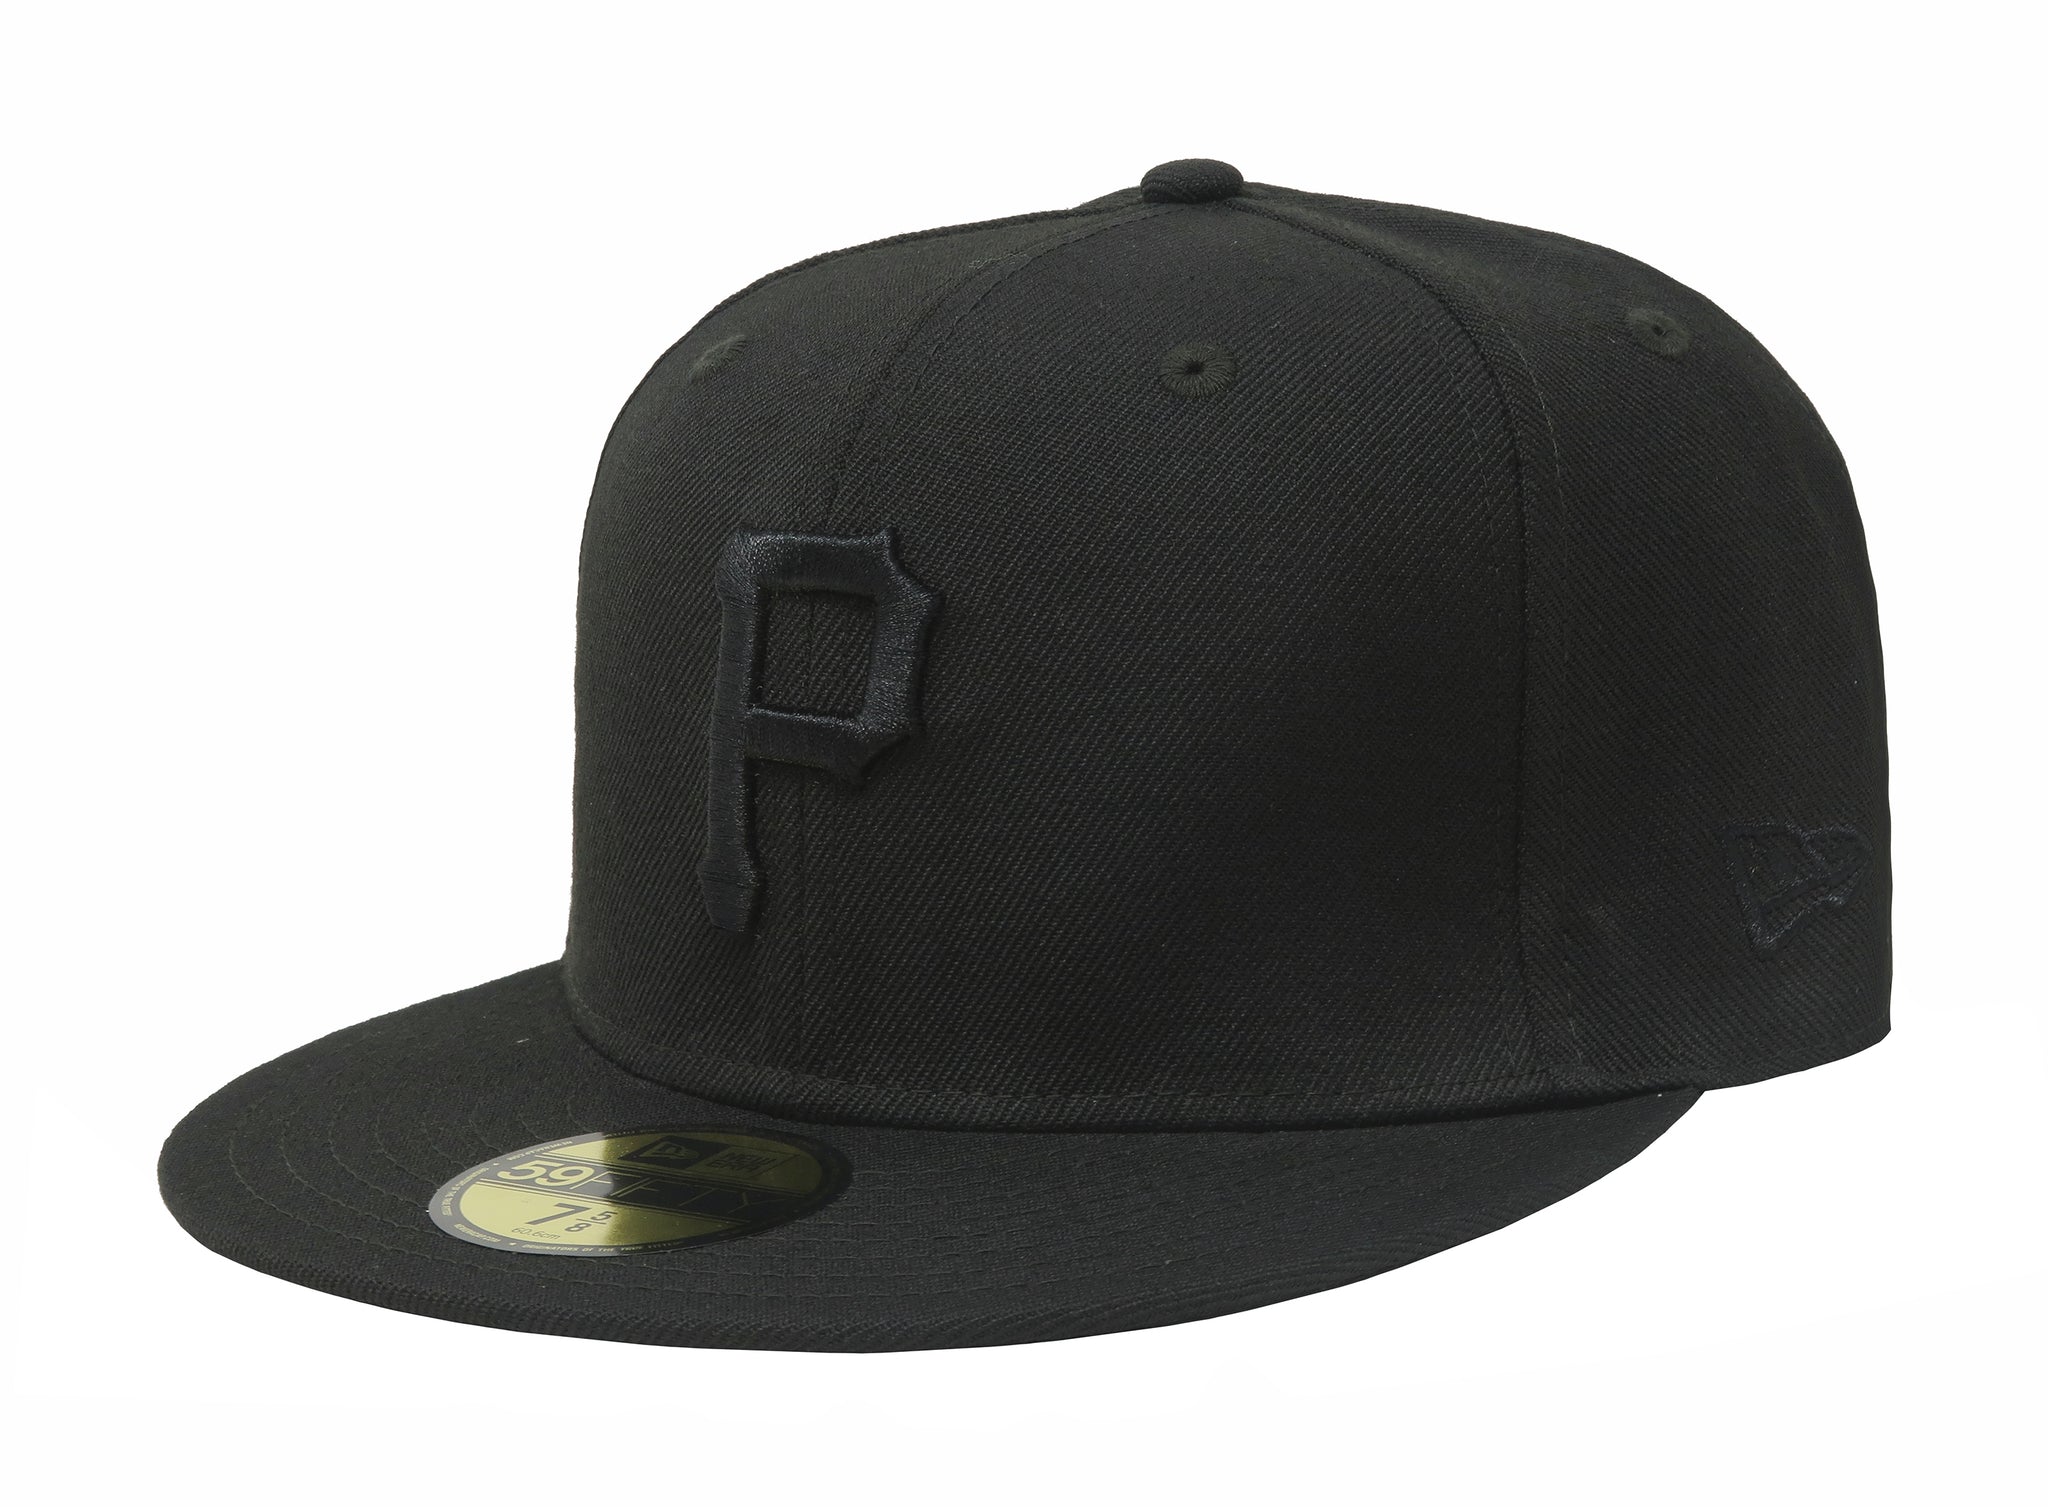 New Era 59Fifty Men's Pittsburgh Pirates Black On Black Fitted Cap